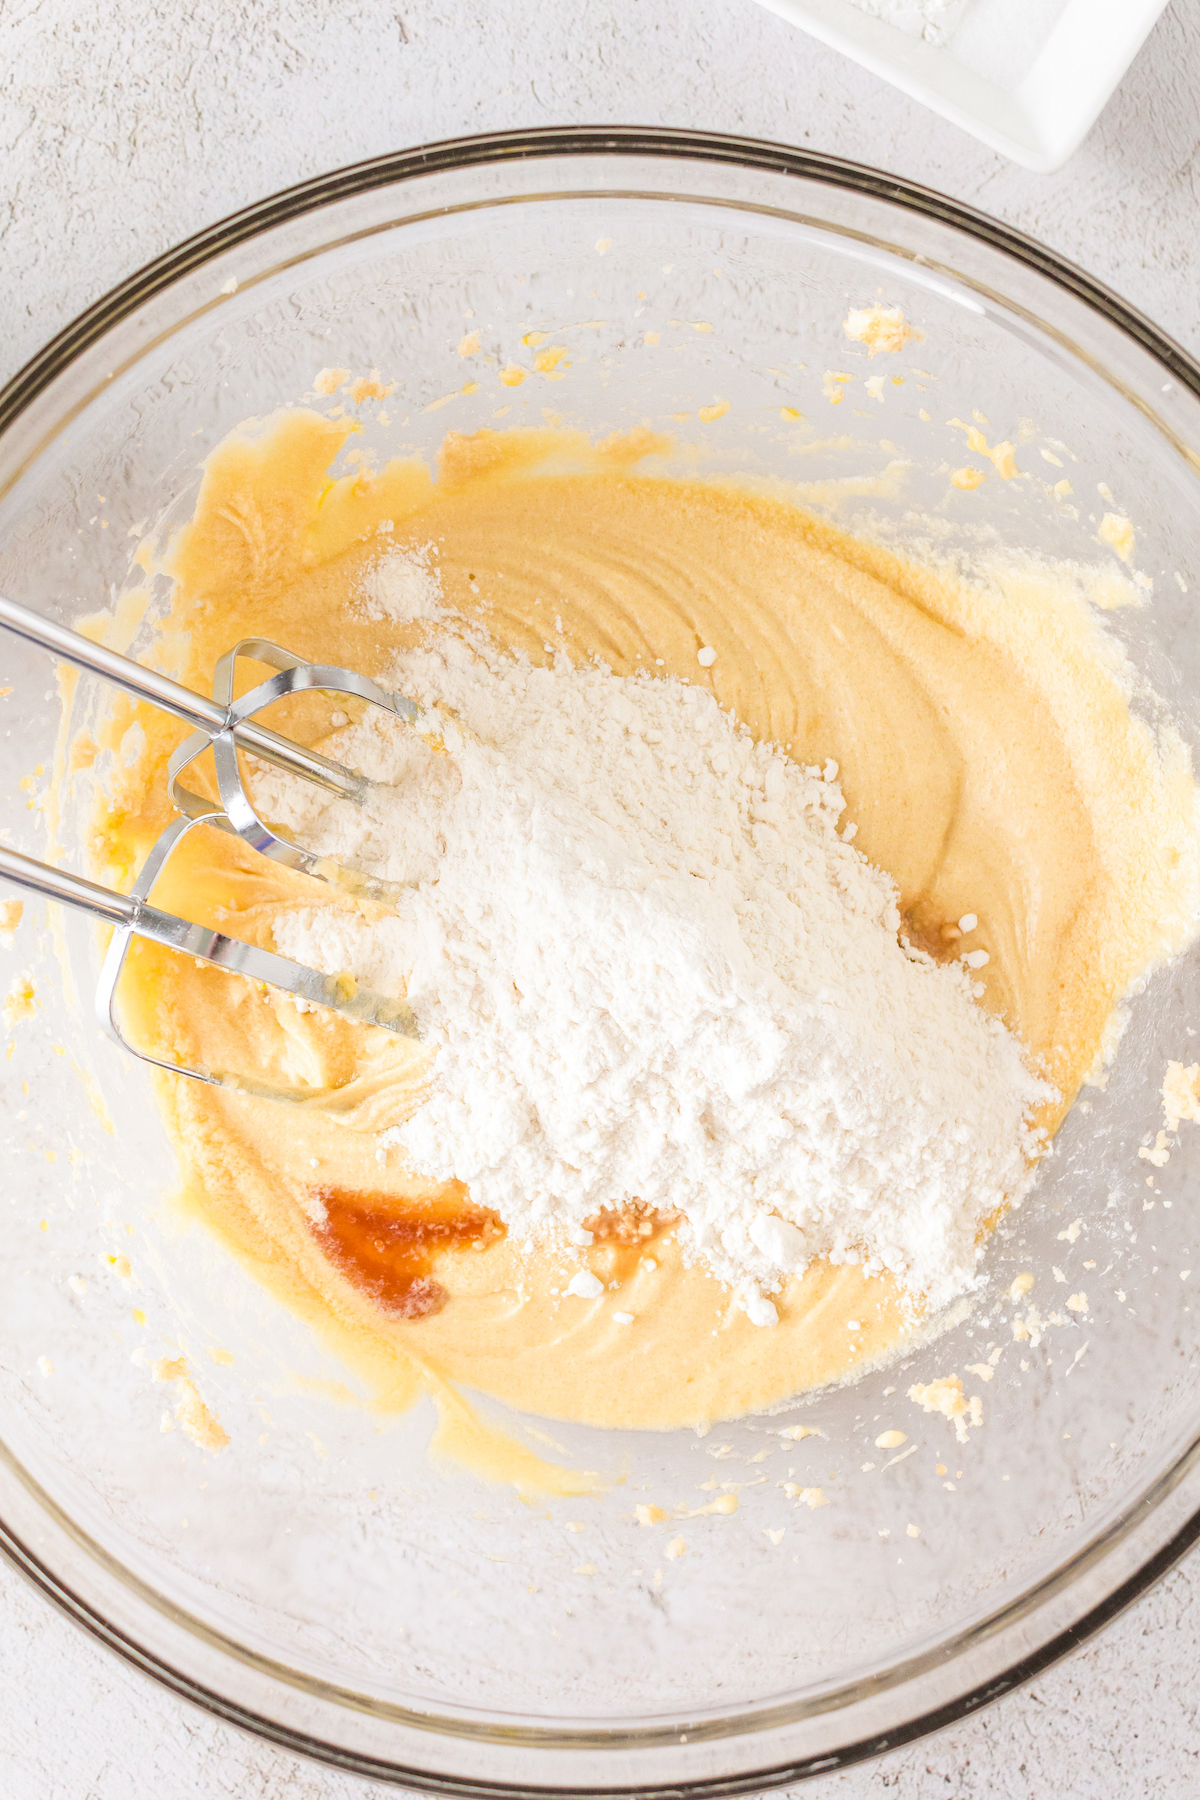 Incorporating the dry ingredients into the batter.